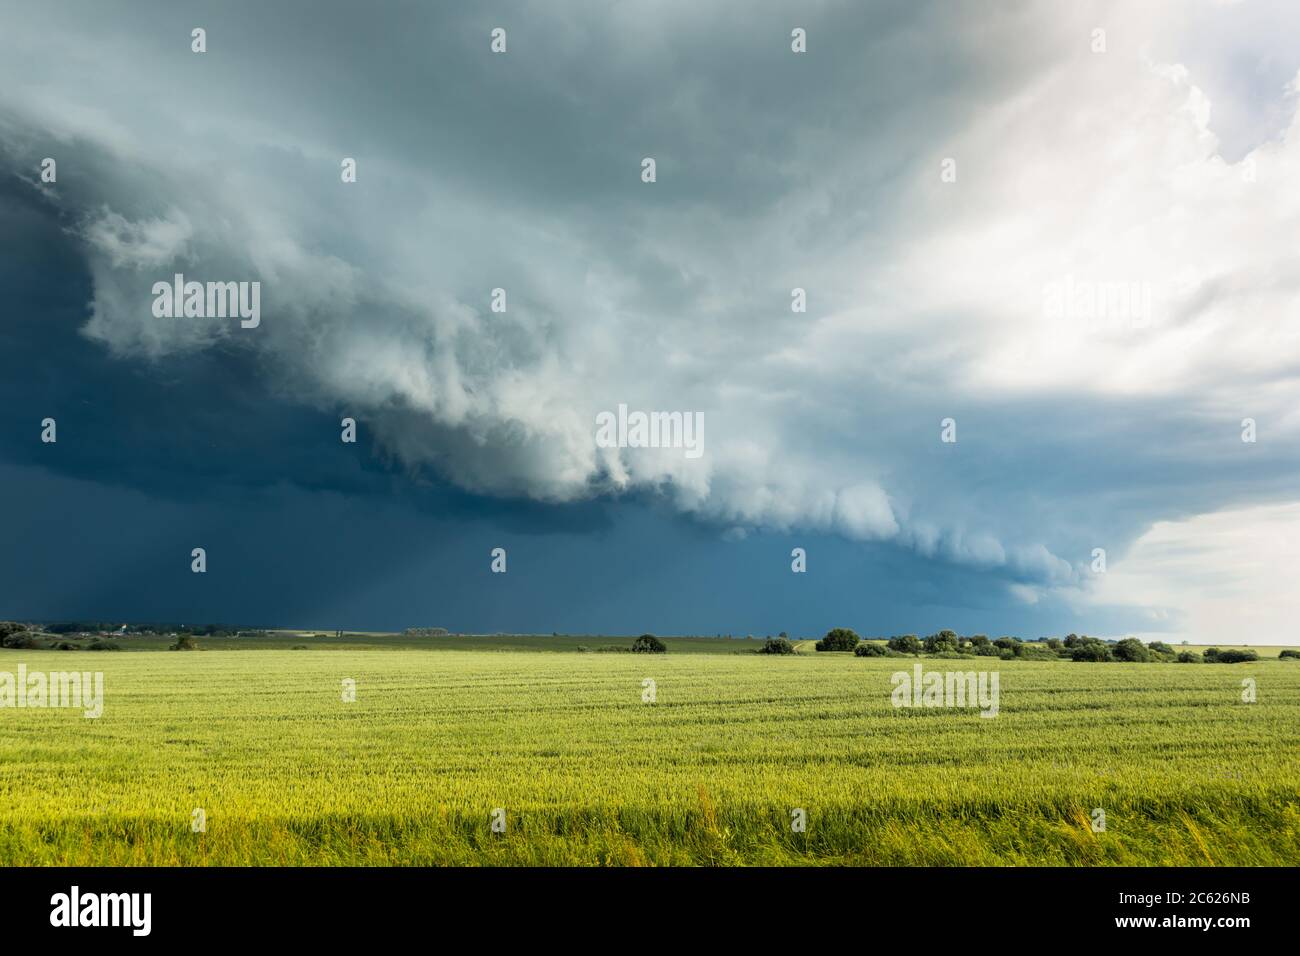 A powerful storm cloud over a field of wheat, which is illuminated by the sun. Hurricane. Thunderstorm. Before the storm Stock Photo